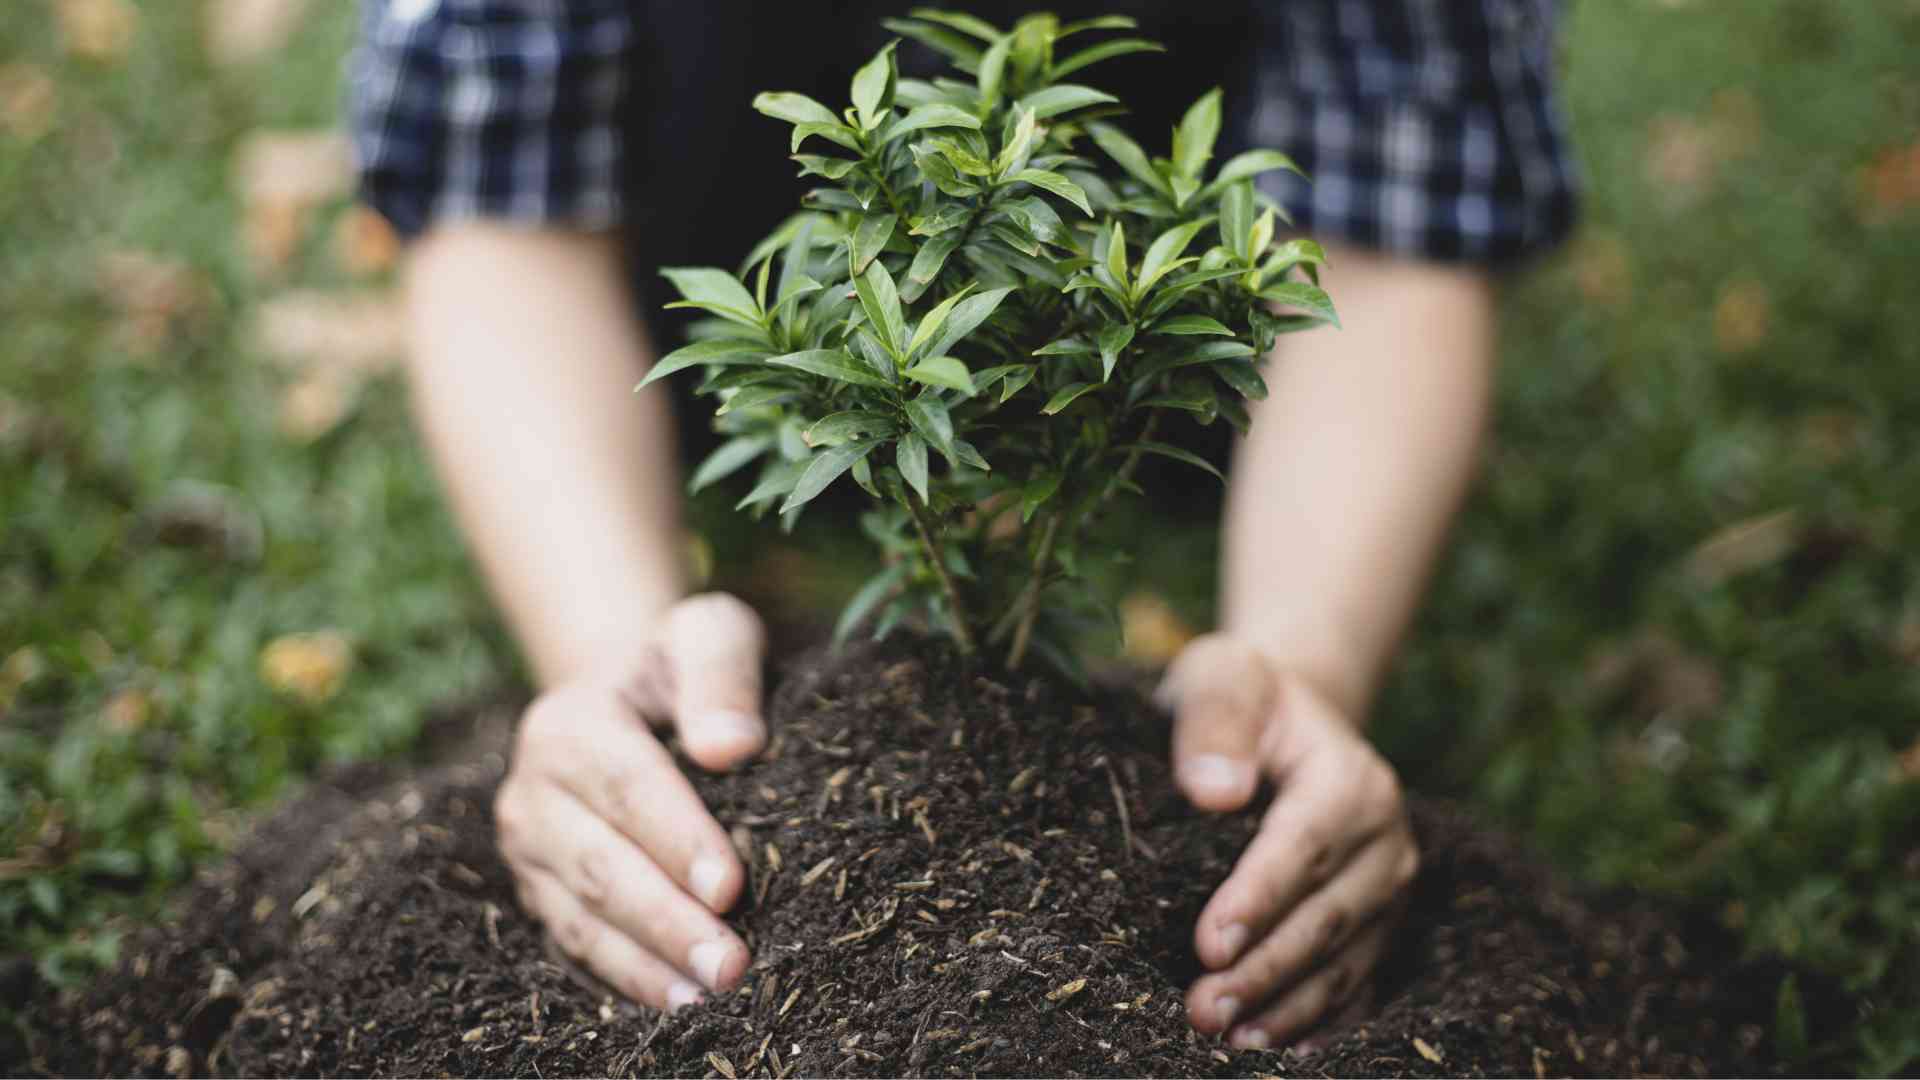 Close up of a person attending to a small green plant surrounded by soil